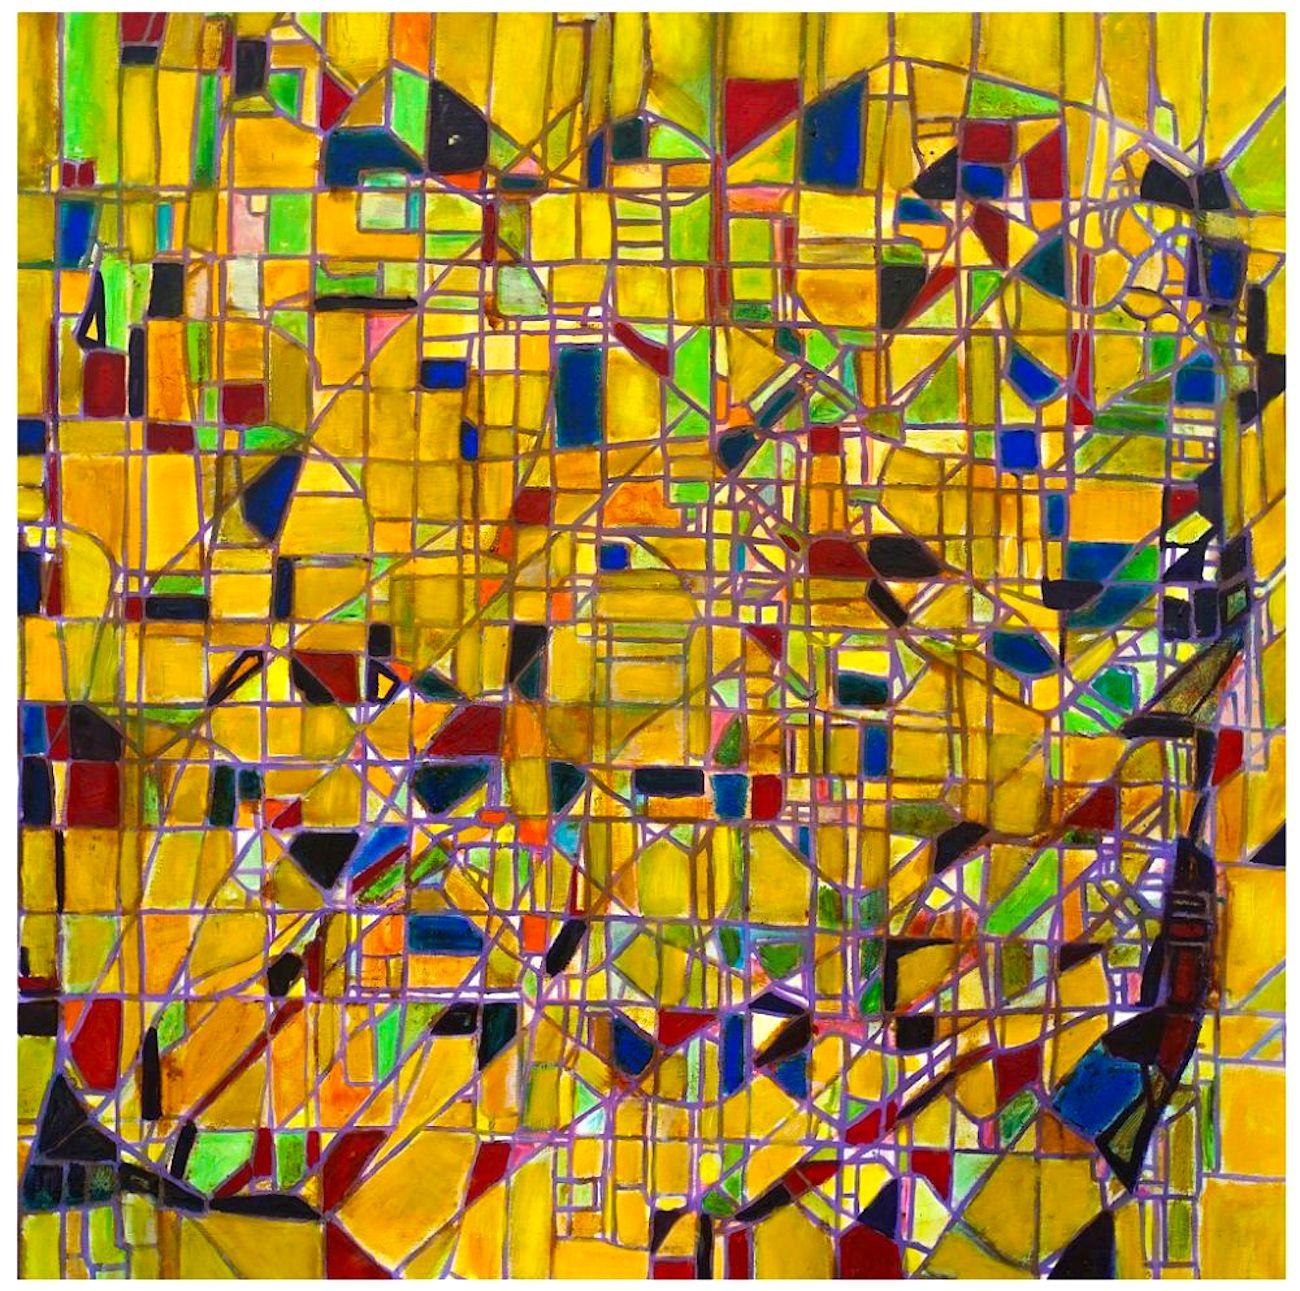 Reticulum is an original artwork realized by the artist Giorgio Lo Fermo in 1995. Oil on canvas; perfect conditions.

This gorgeous painting represents a grid that covers its entire surface. The reticulum series recalls geometrical artworks realized